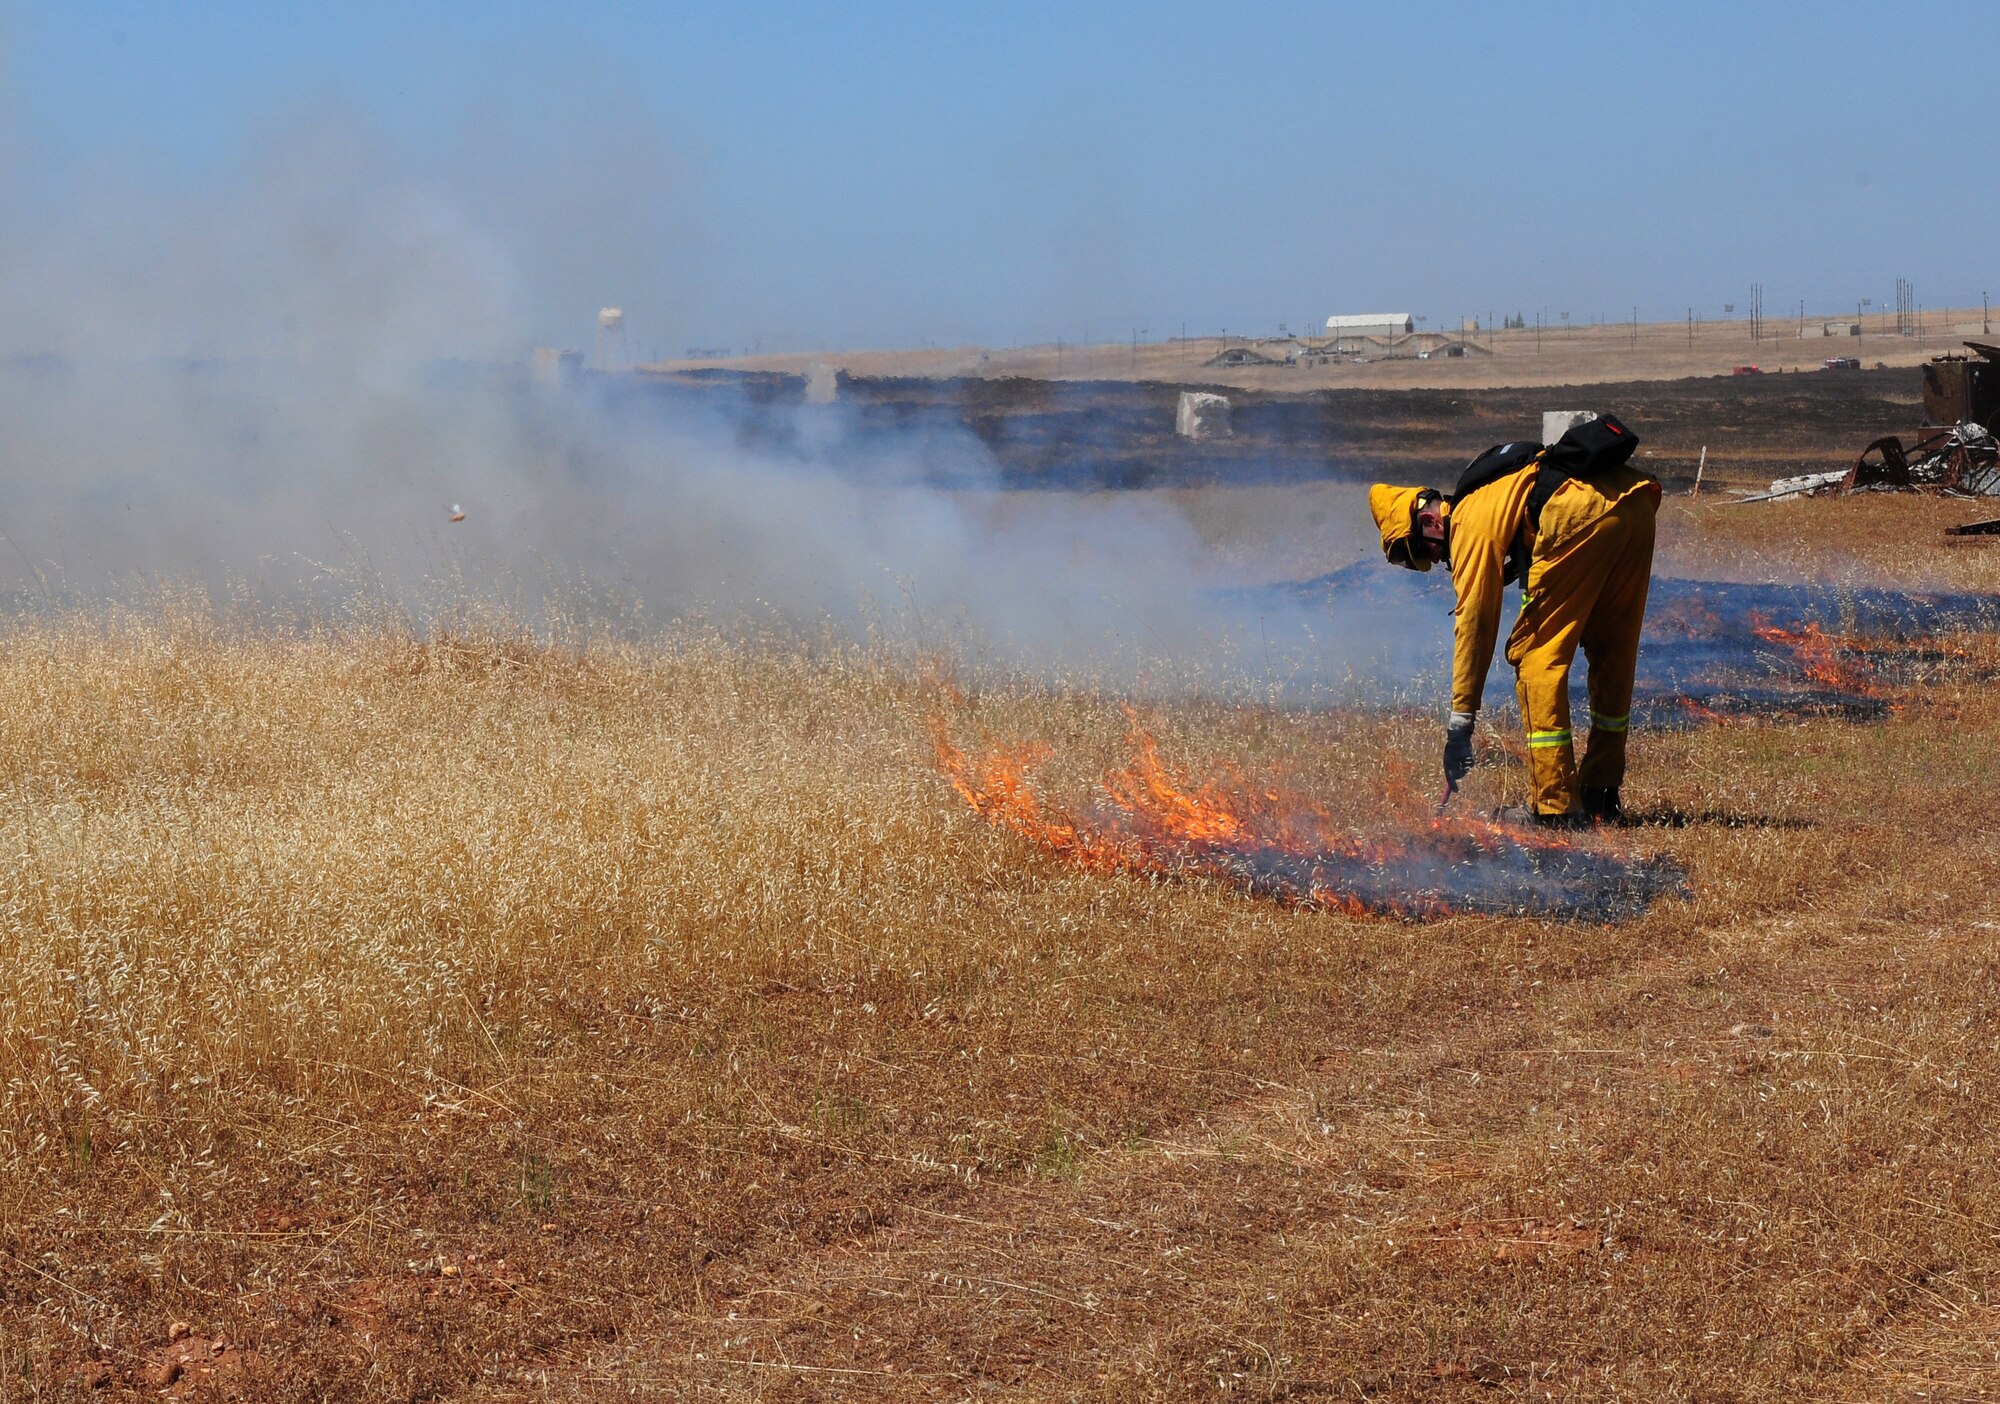 Airman 1st Class Sean Russell, 9th Civil Engineering Squadron firefighter, uses a flare to burn the remaining unburned patches of grassland during the prescribed burn of the M60 machine gun range at Beale Air Force Base, Calif., June 19, 2012. Team Beale firefighters often support local fire departments during the fire season. (U.S. Air Force photo by Senior Airman Allen Pollard/Released)